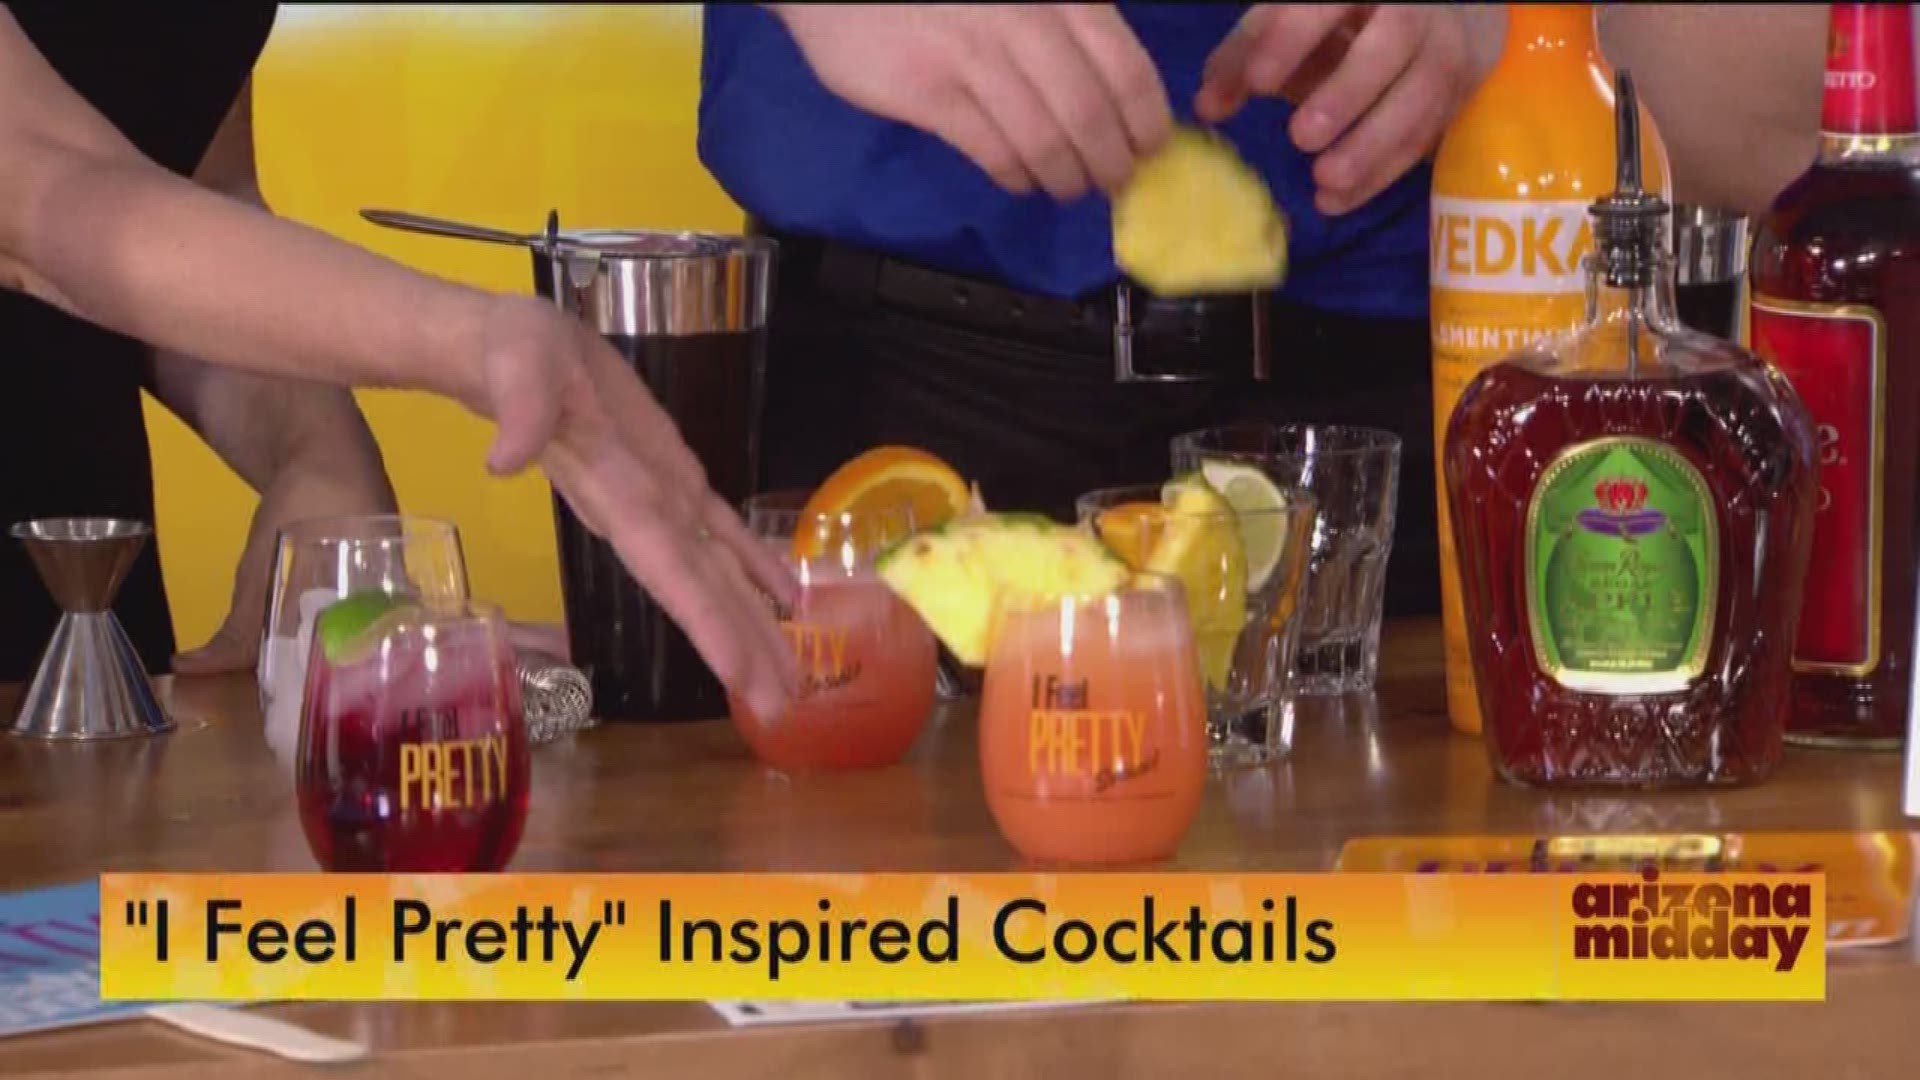 The new movie "I Feel Pretty" comes out this weekend, and there's no better way to celebrate than a night out with the girls to Studio Movie Grill! Bartender Jacob Rosenburg shows us how to make drinks inspired by the movie.